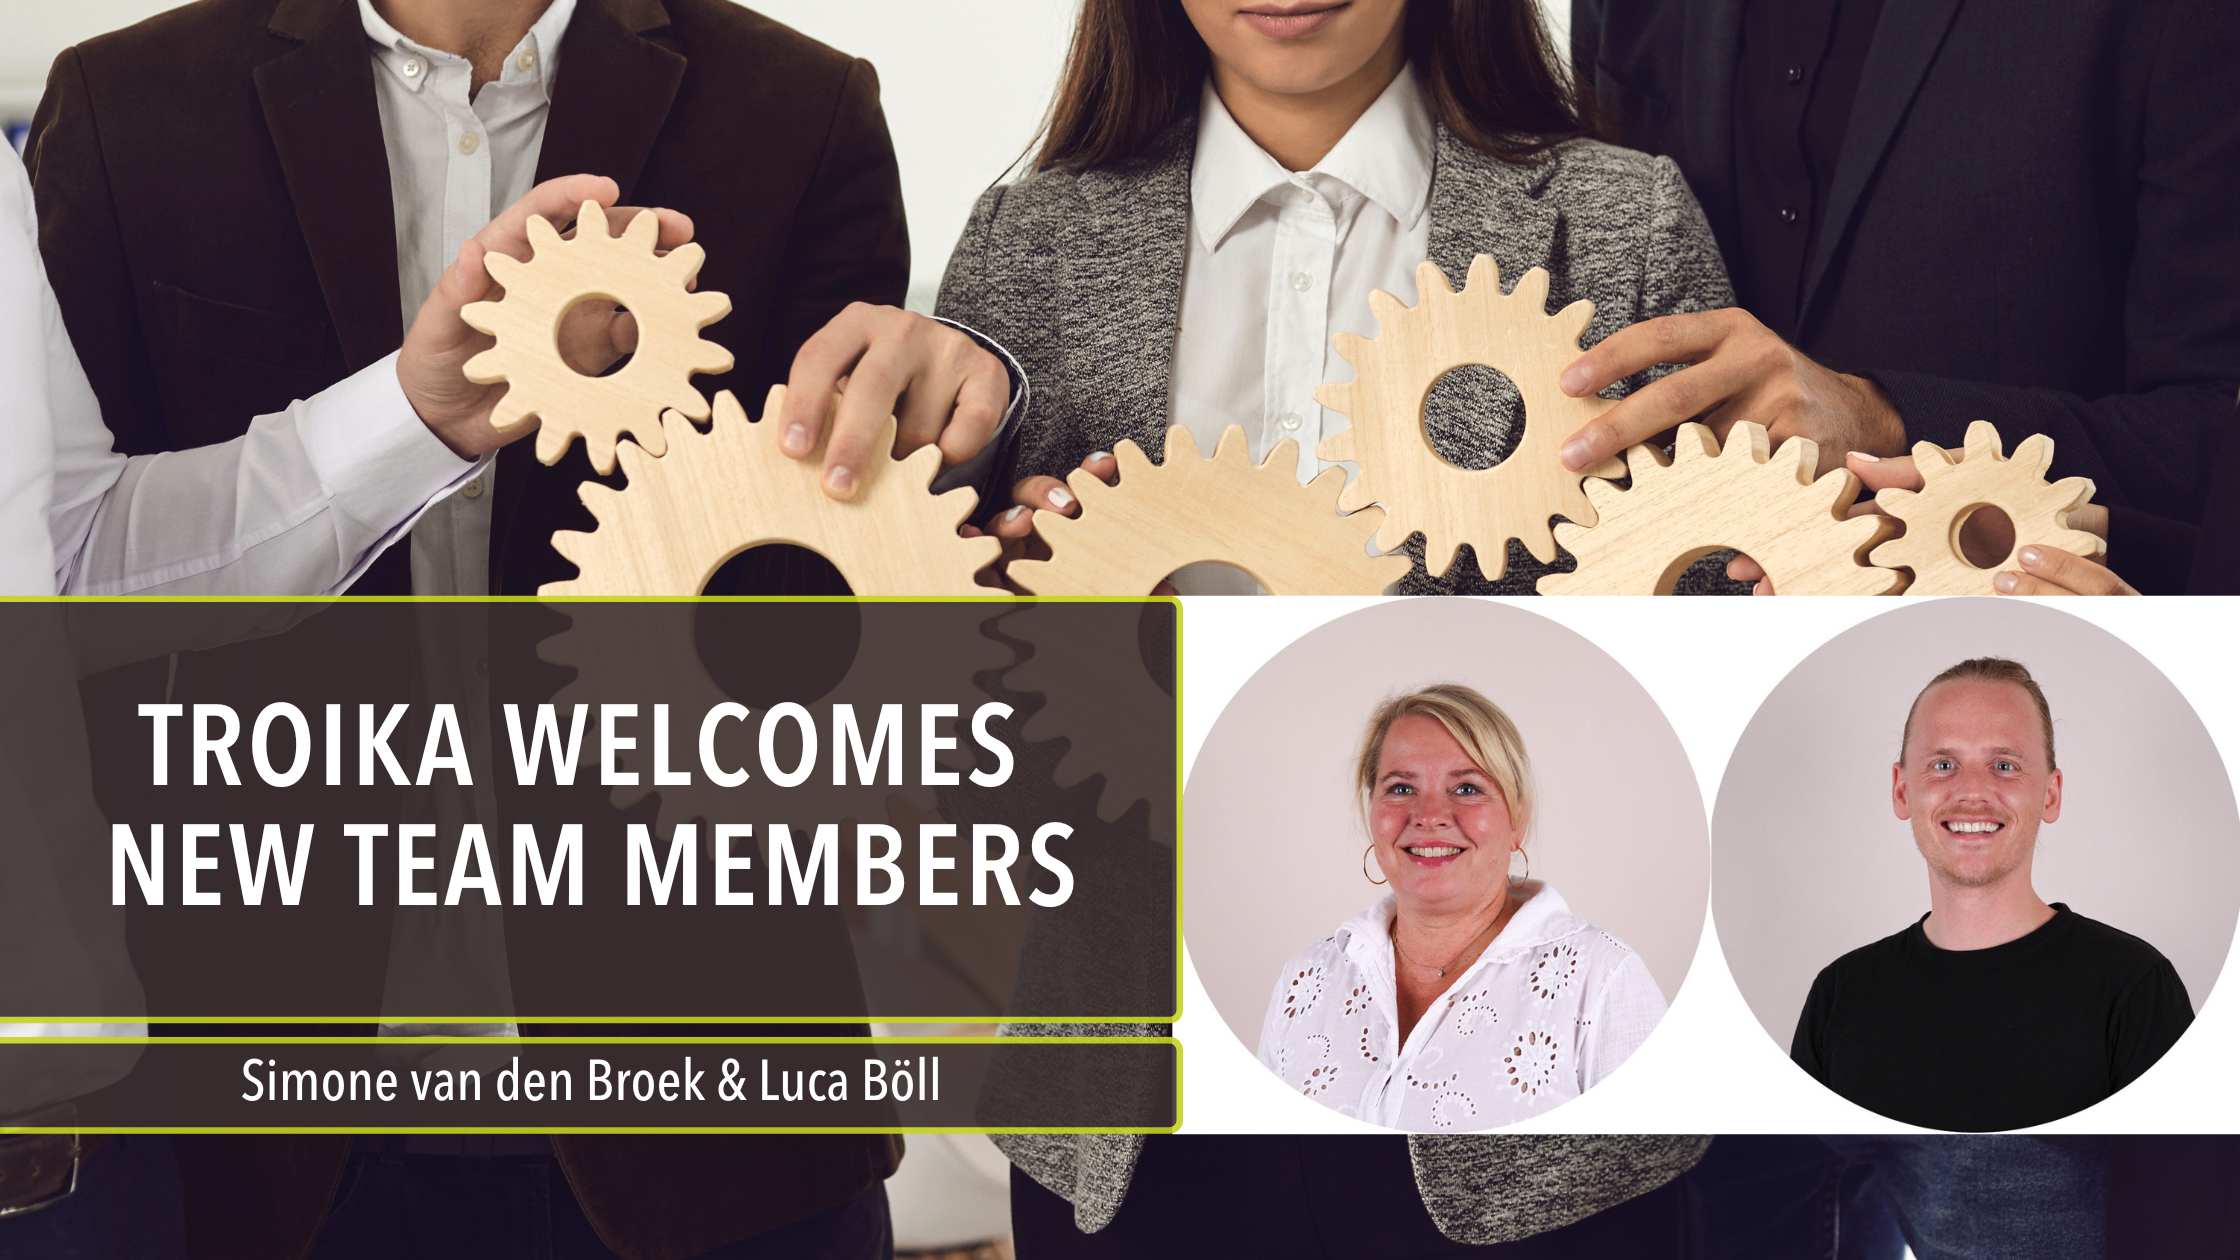 TROIKA Welcomes New Team Members in Autumn!